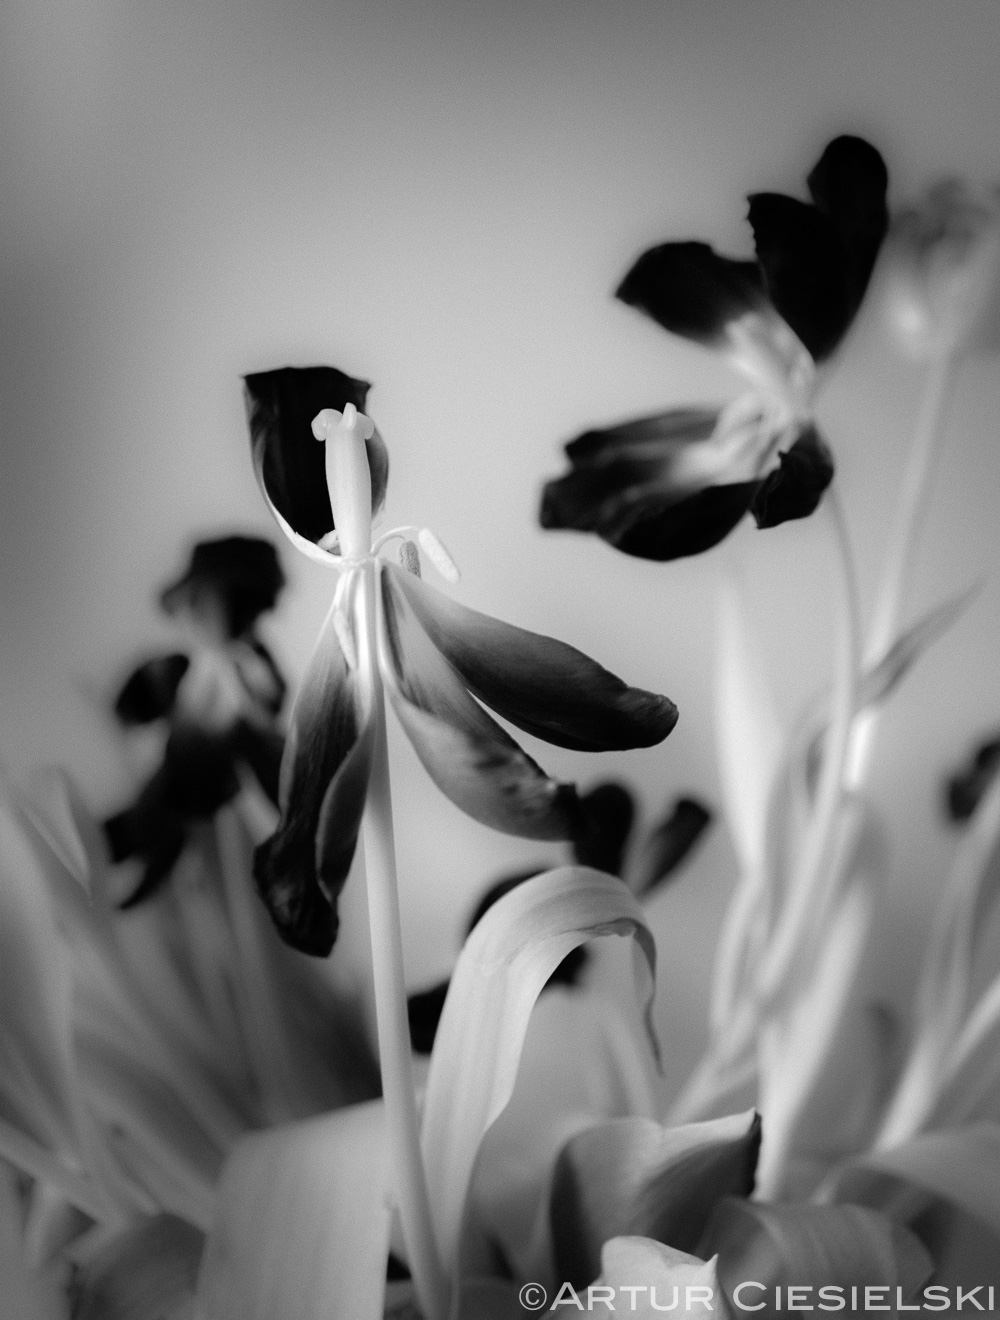 infrared tulips with Sony A7ii and 35mm lens.